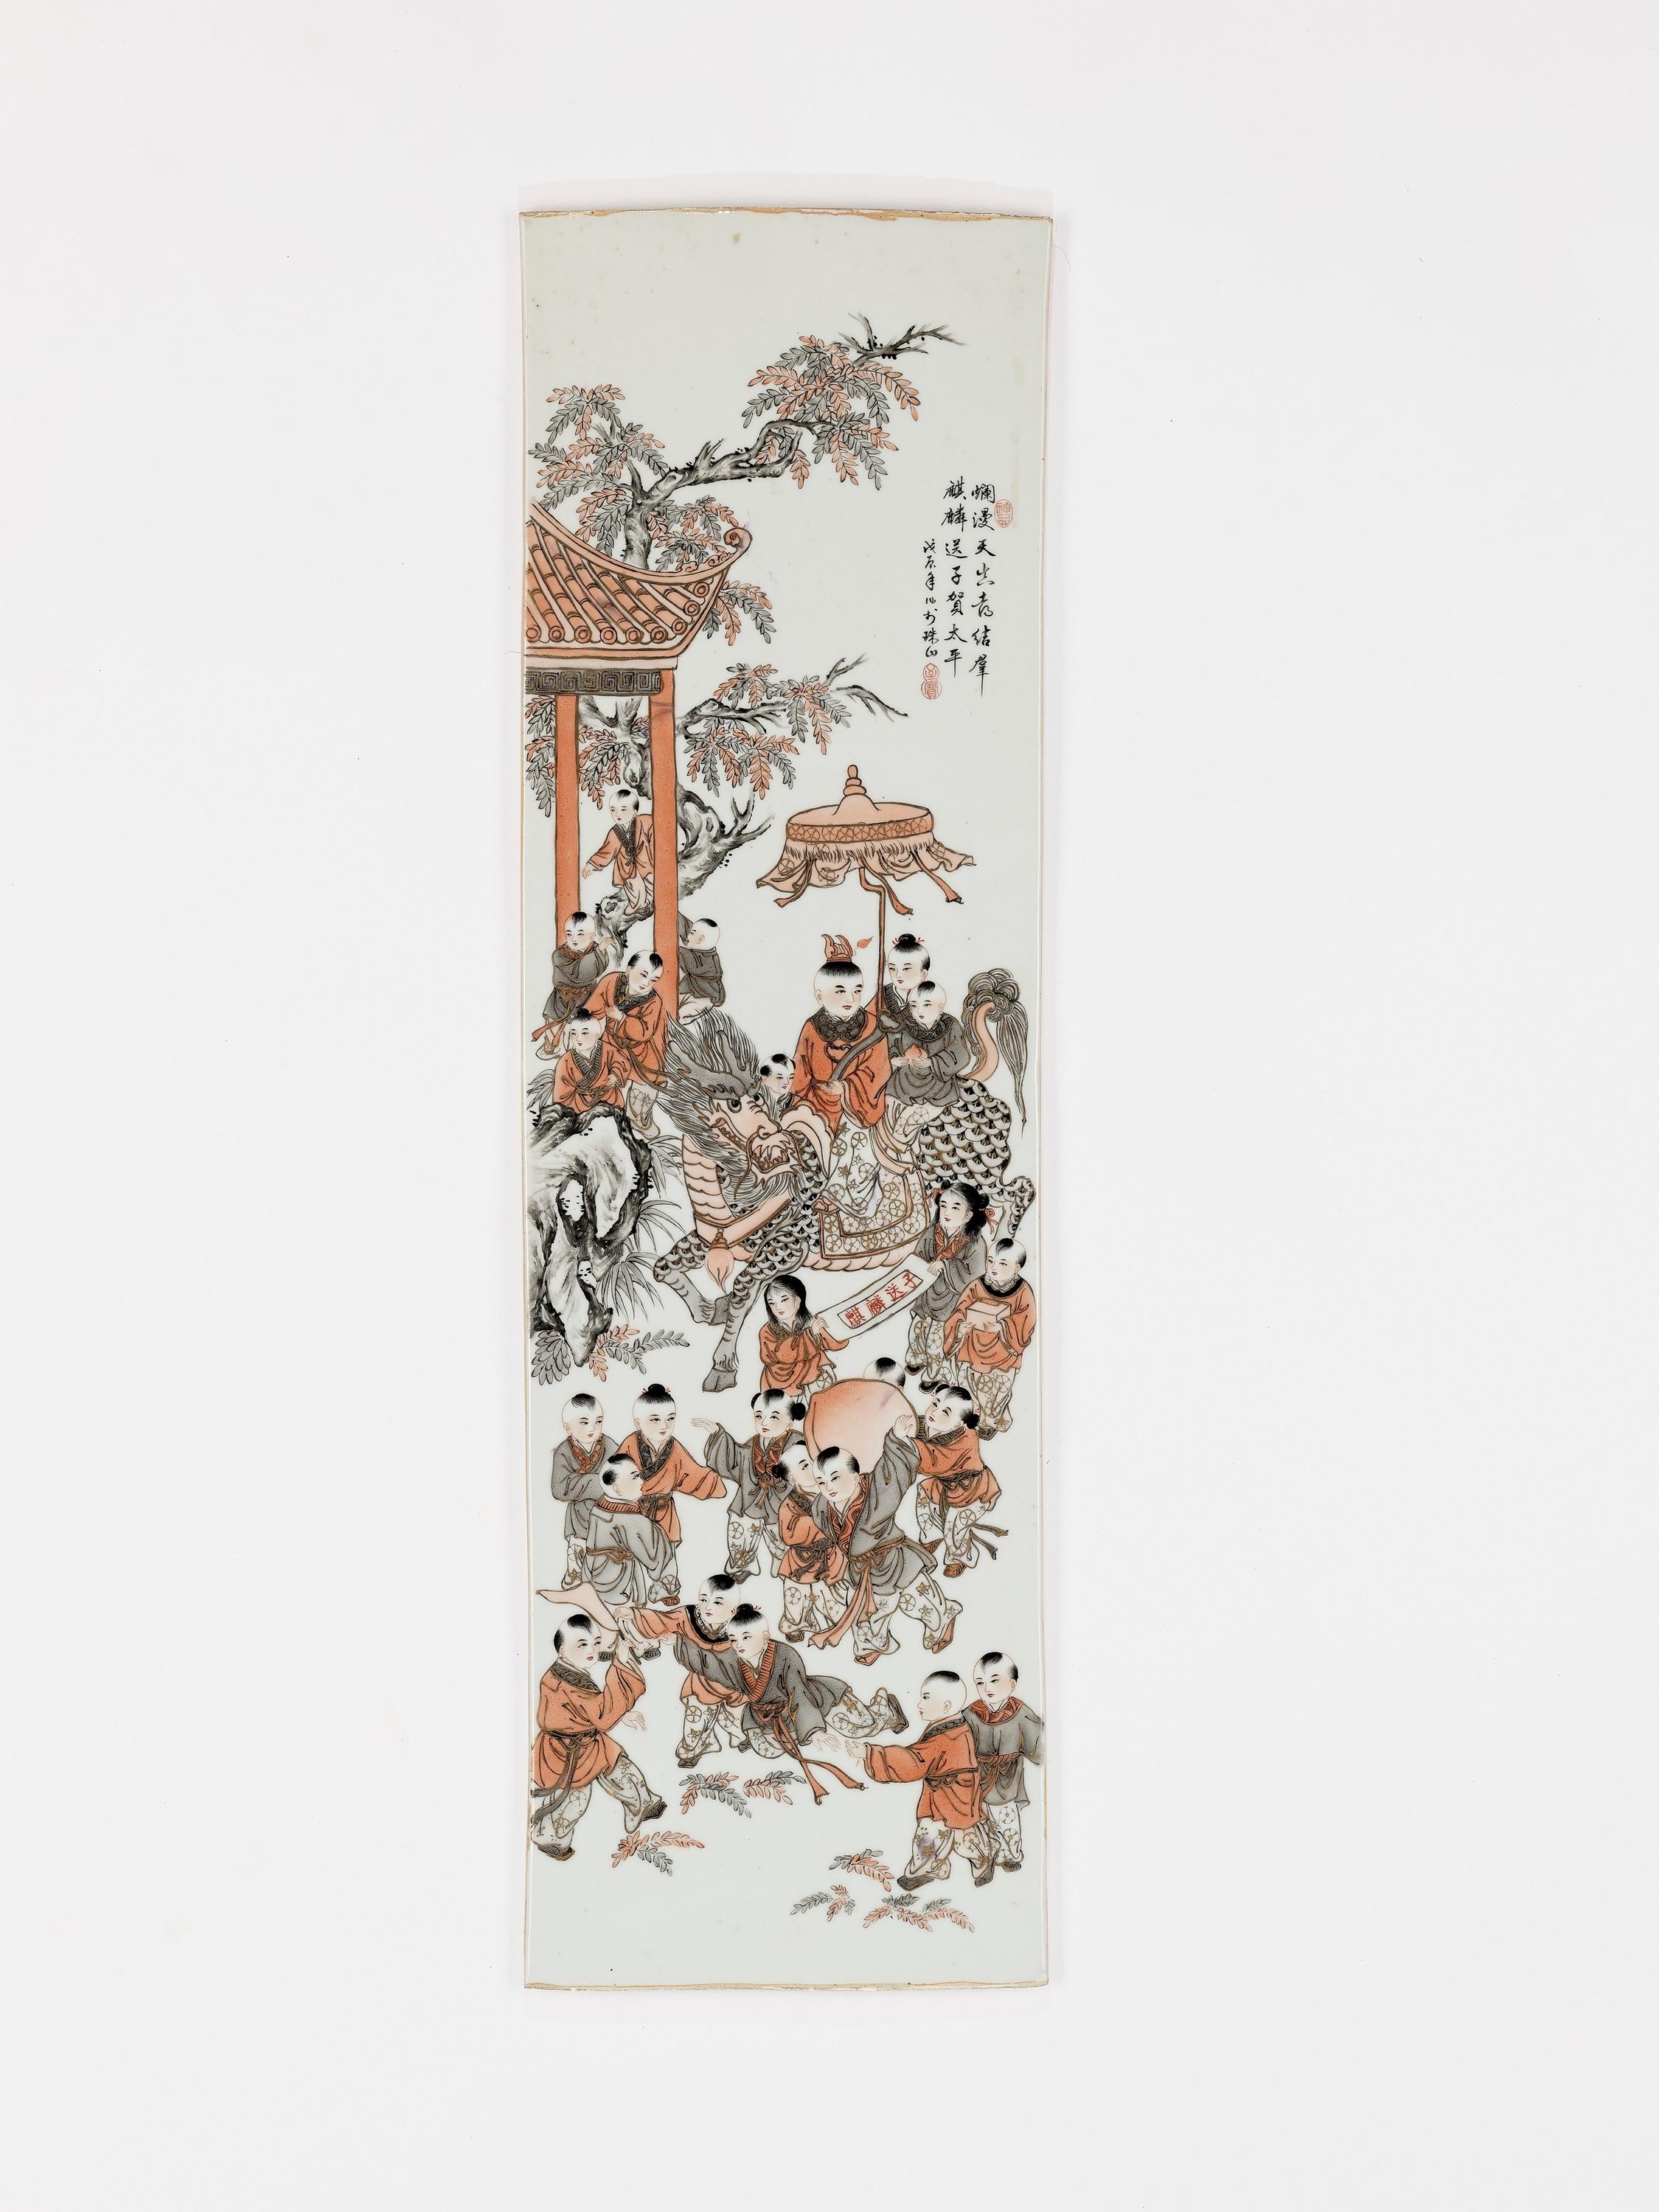 20th Century Chinese Enameled Porcelain Wall Plaque
Late Qing to Republic period (1900-1950)

The plaque decorated with gray and iron-red enamels and delineated with gold, showing children celebrating, some are shown carrying a large peach,